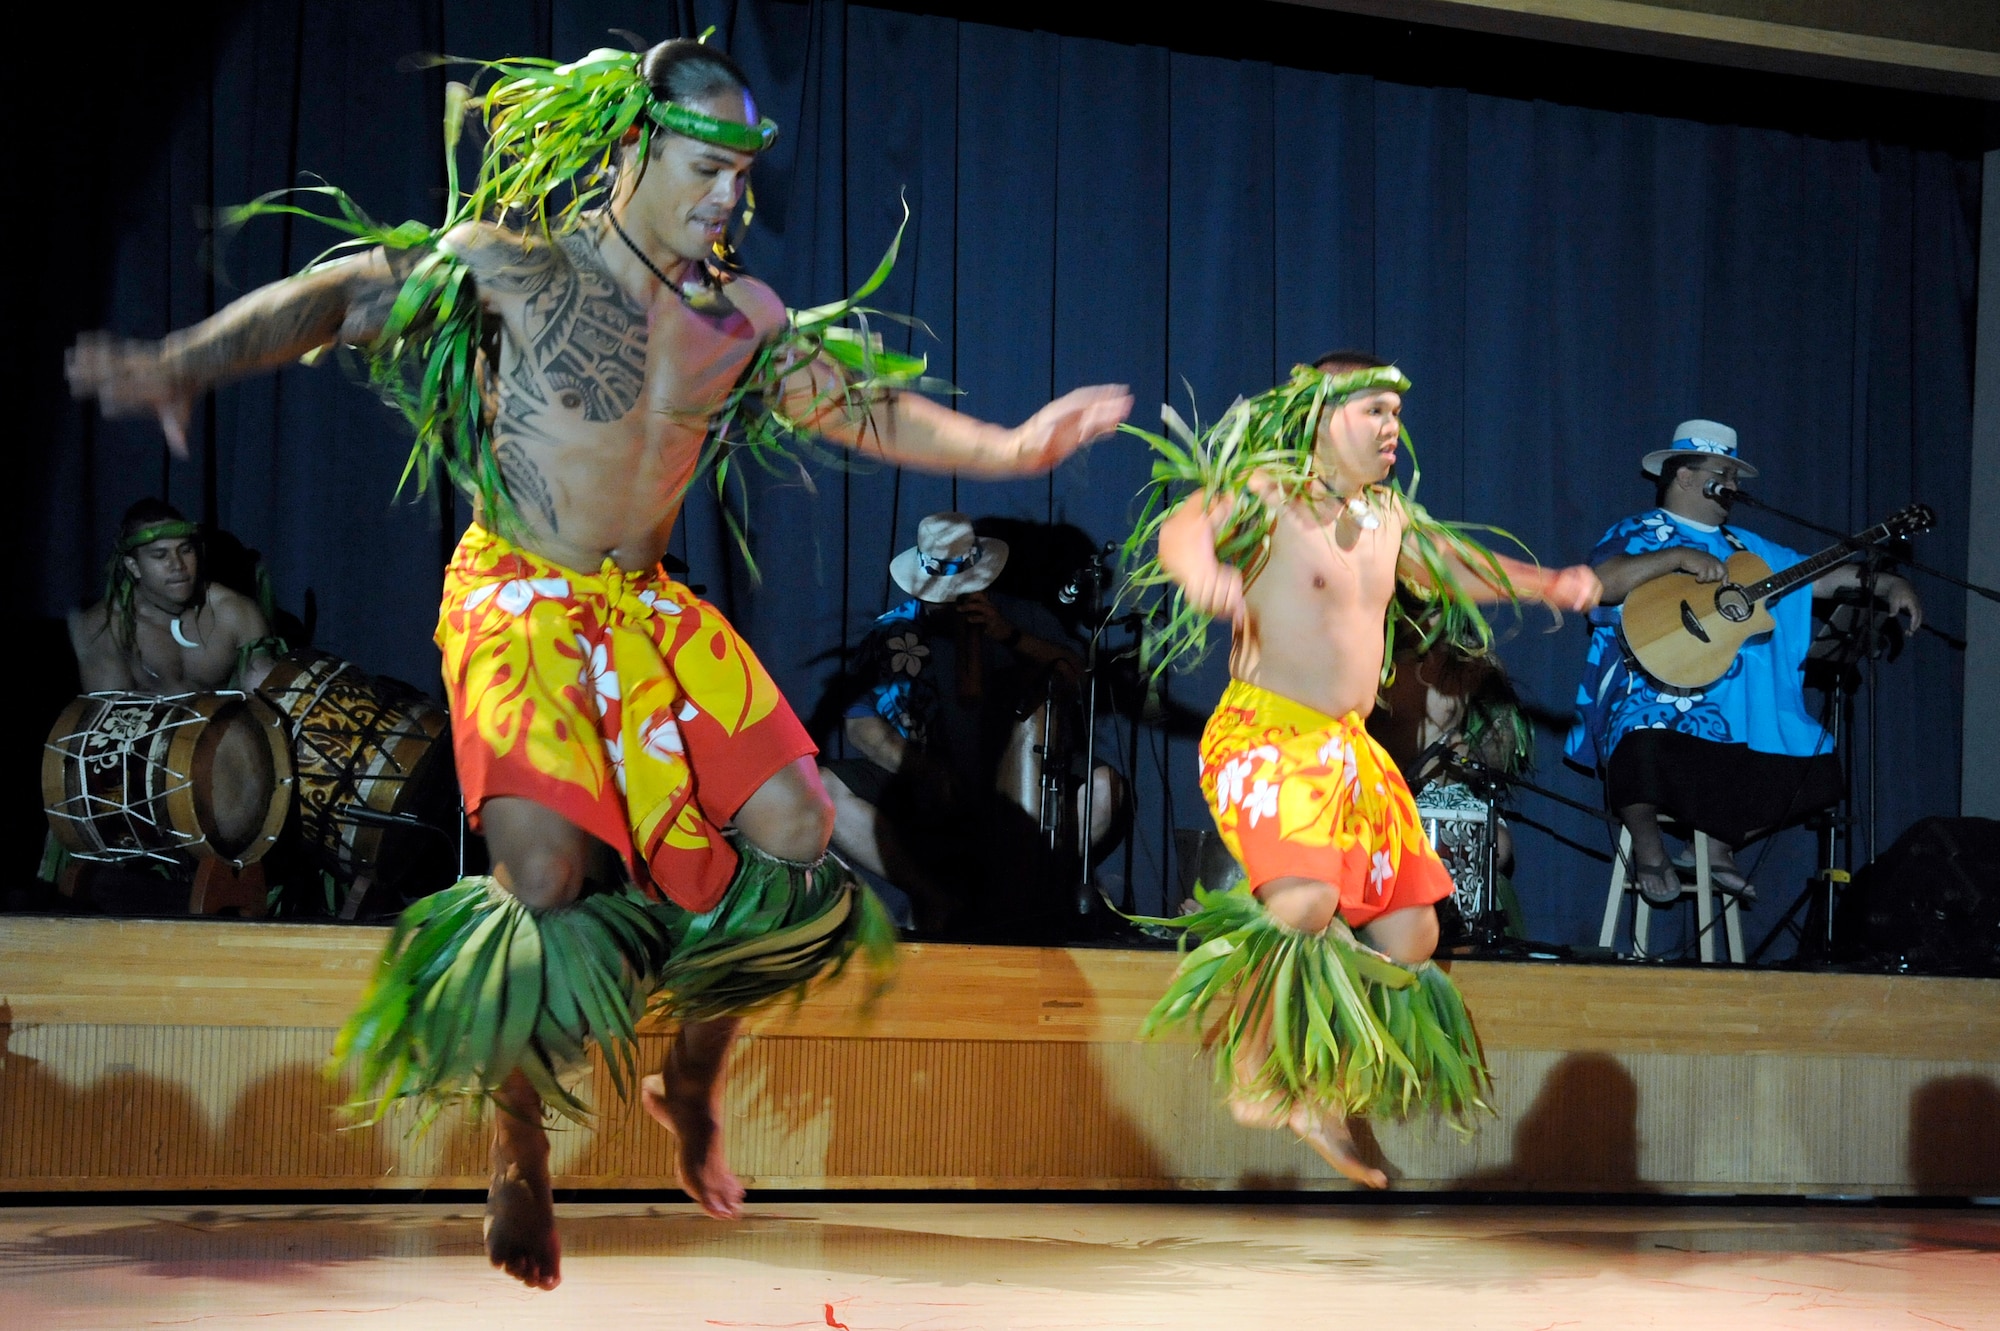 MISAWA AIR BASE, Japan -- Mervyn Lilo, left, the lead male dancer for Ma'ohi Nui, and Jon Makakoa Ulibas perform for members of the Misawa community during a luau at the Misawa Collocated Club July 29. Ma'ohi Nui performed at the club as part of an Armed Forces Entertainment show to show their support for military families overseas. (U.S. Air Force photo/Staff Sgt. Marie Brown/Released)